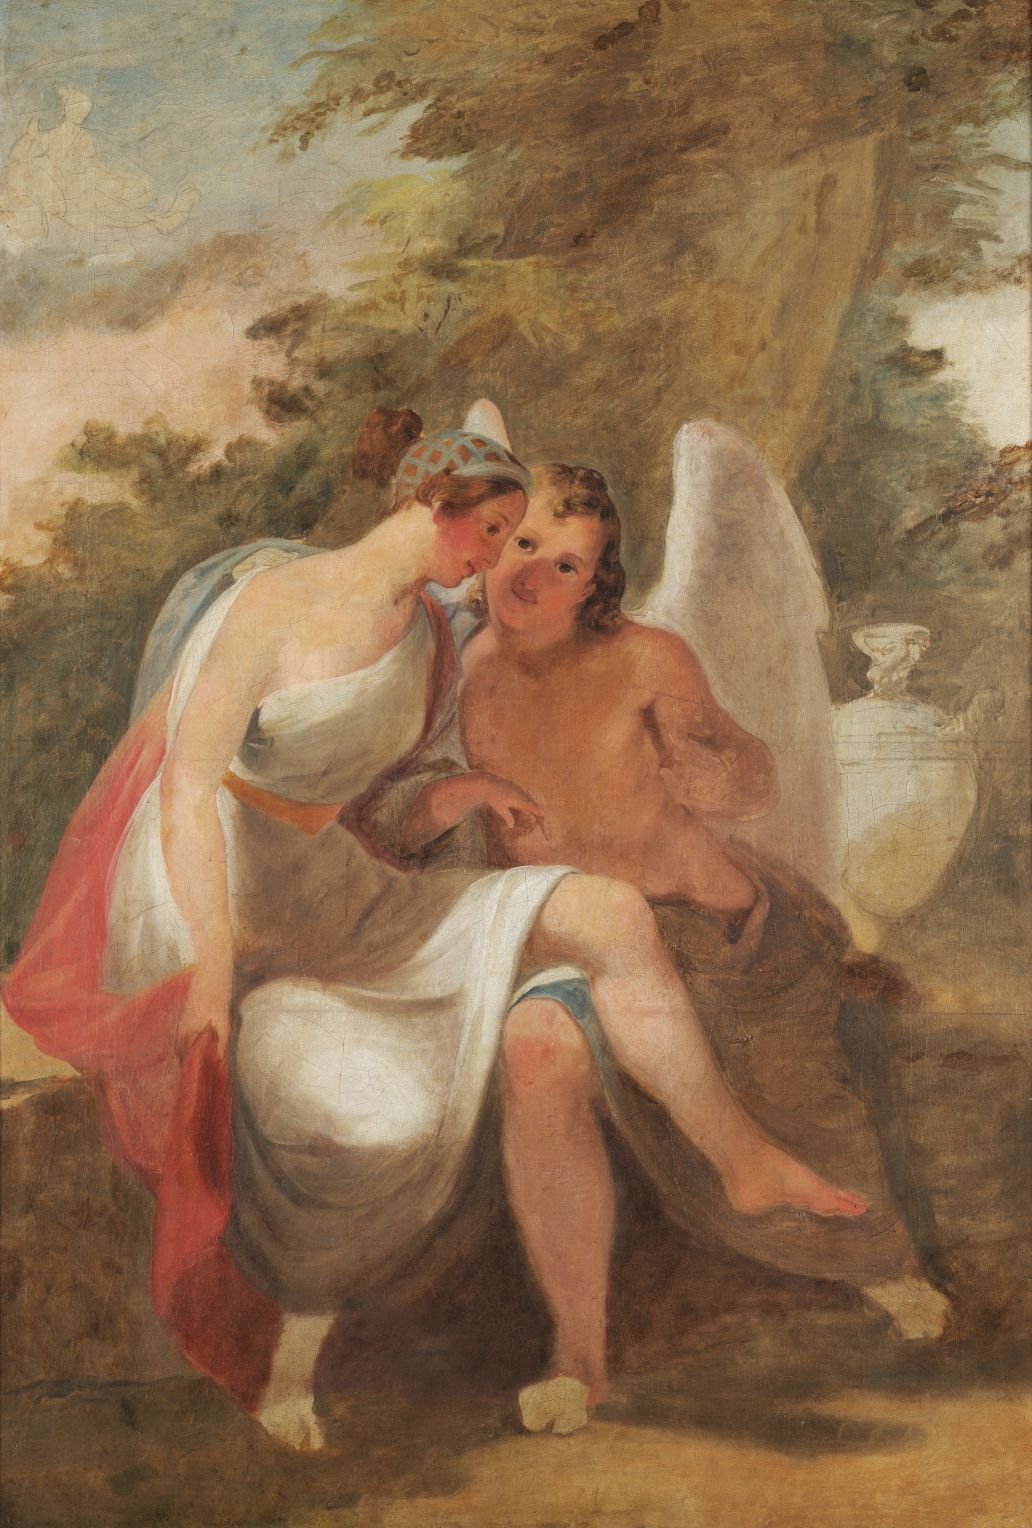 Eros and Psyche - allegory of love - Domingos Sequeirac. 1800-1812